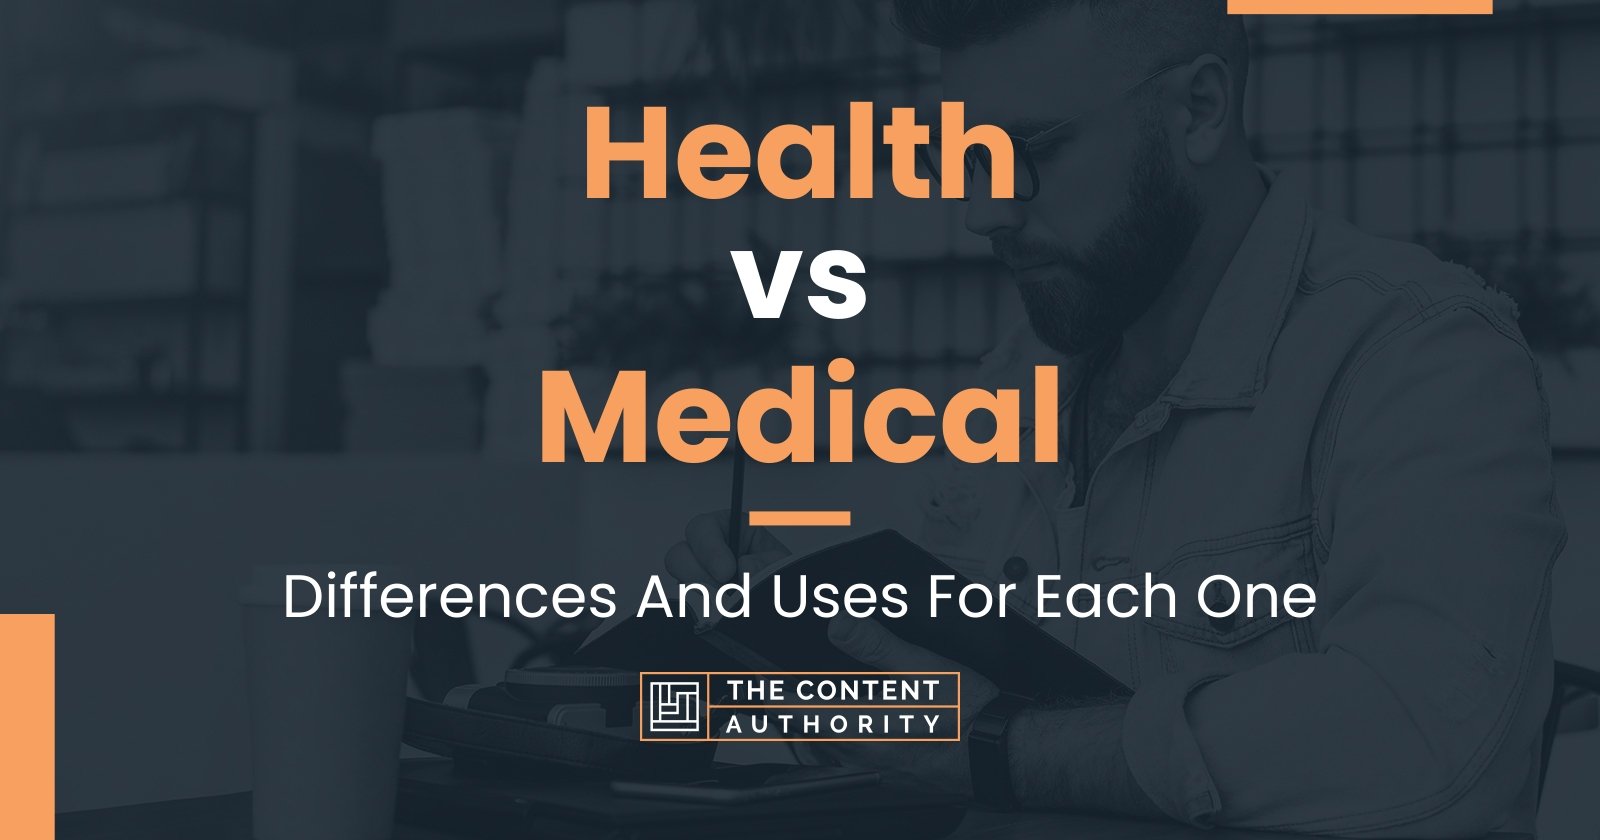 Health vs Medical: Differences And Uses For Each One